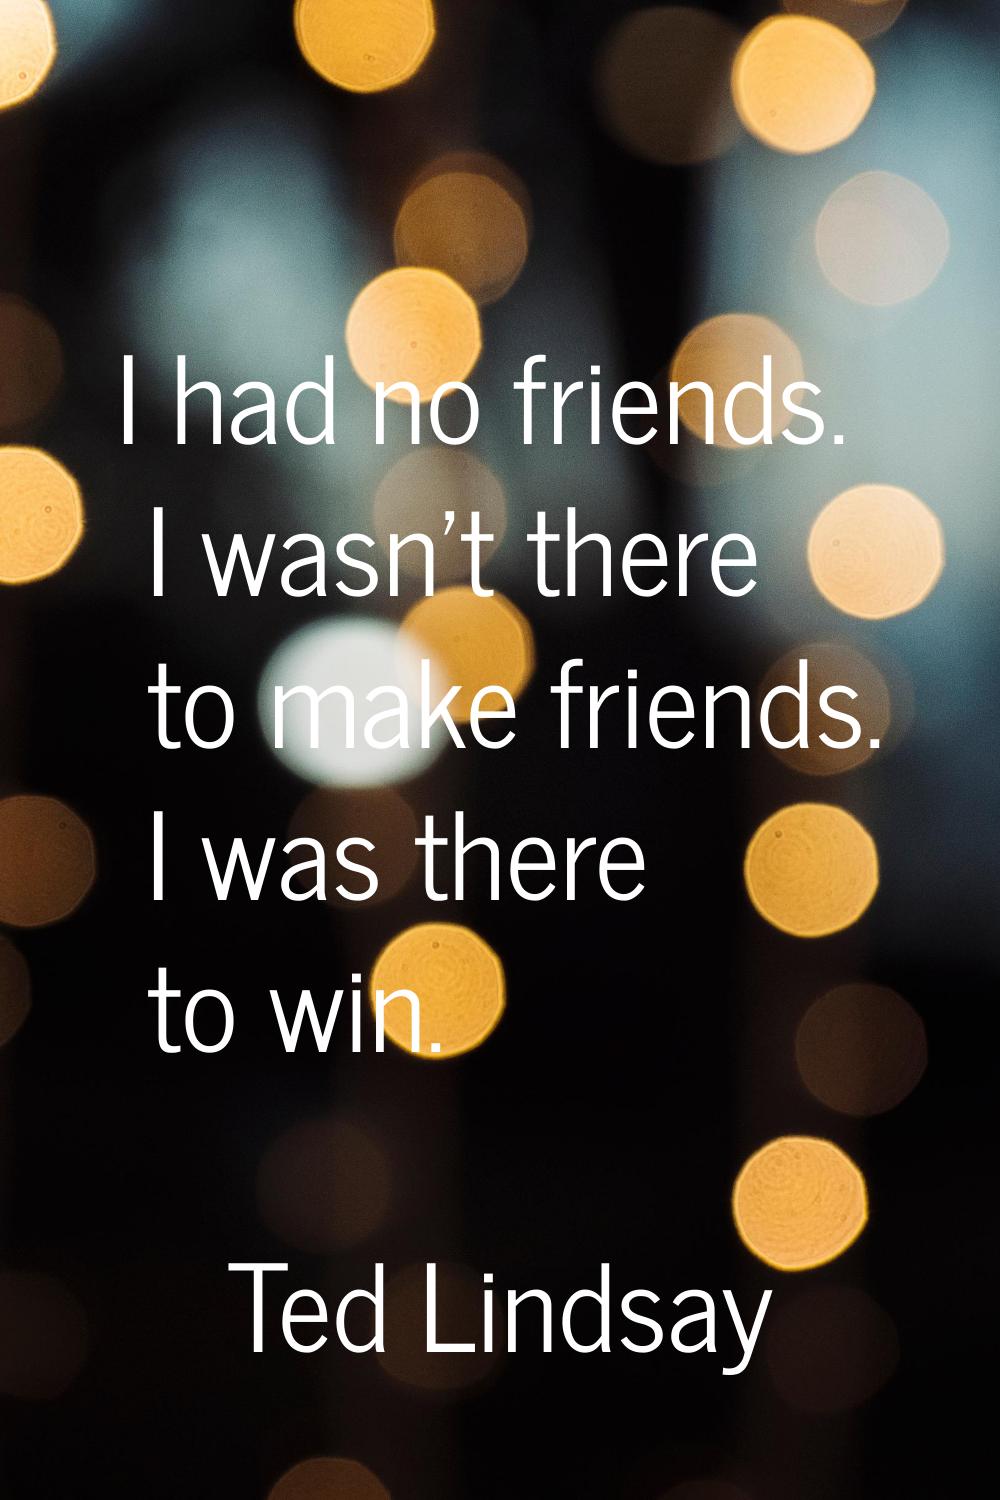 I had no friends. I wasn't there to make friends. I was there to win.